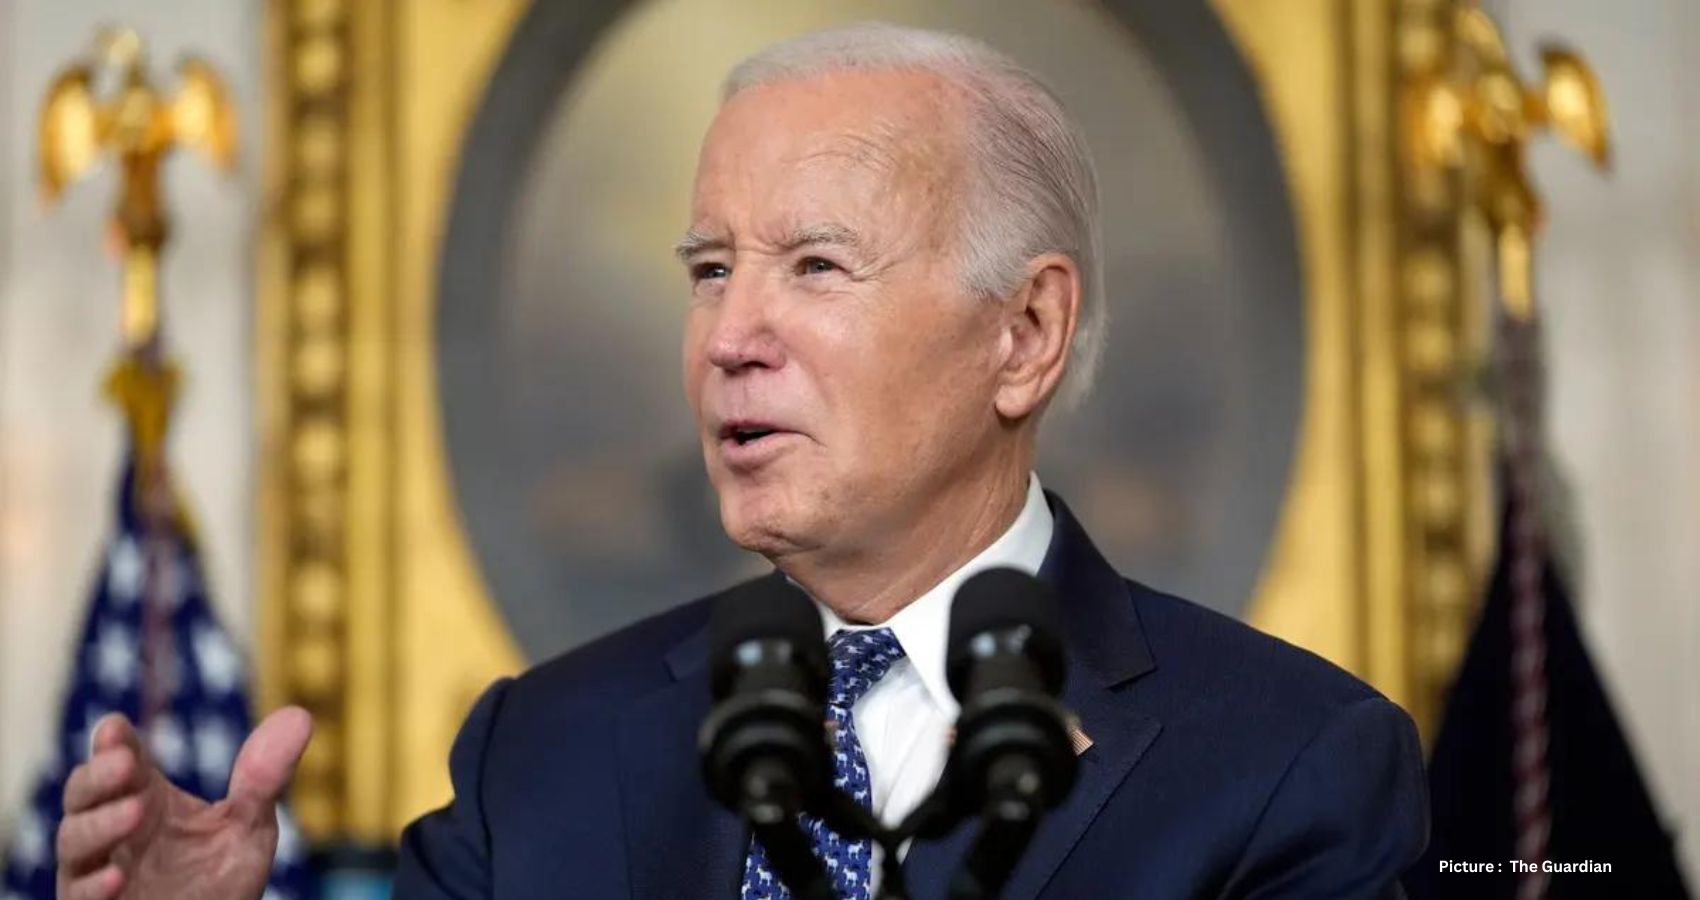 Featured & Cover President Biden Defends Memory Amid Mishandling Allegations Calls Out Investigations Intrusions (The Guardian)